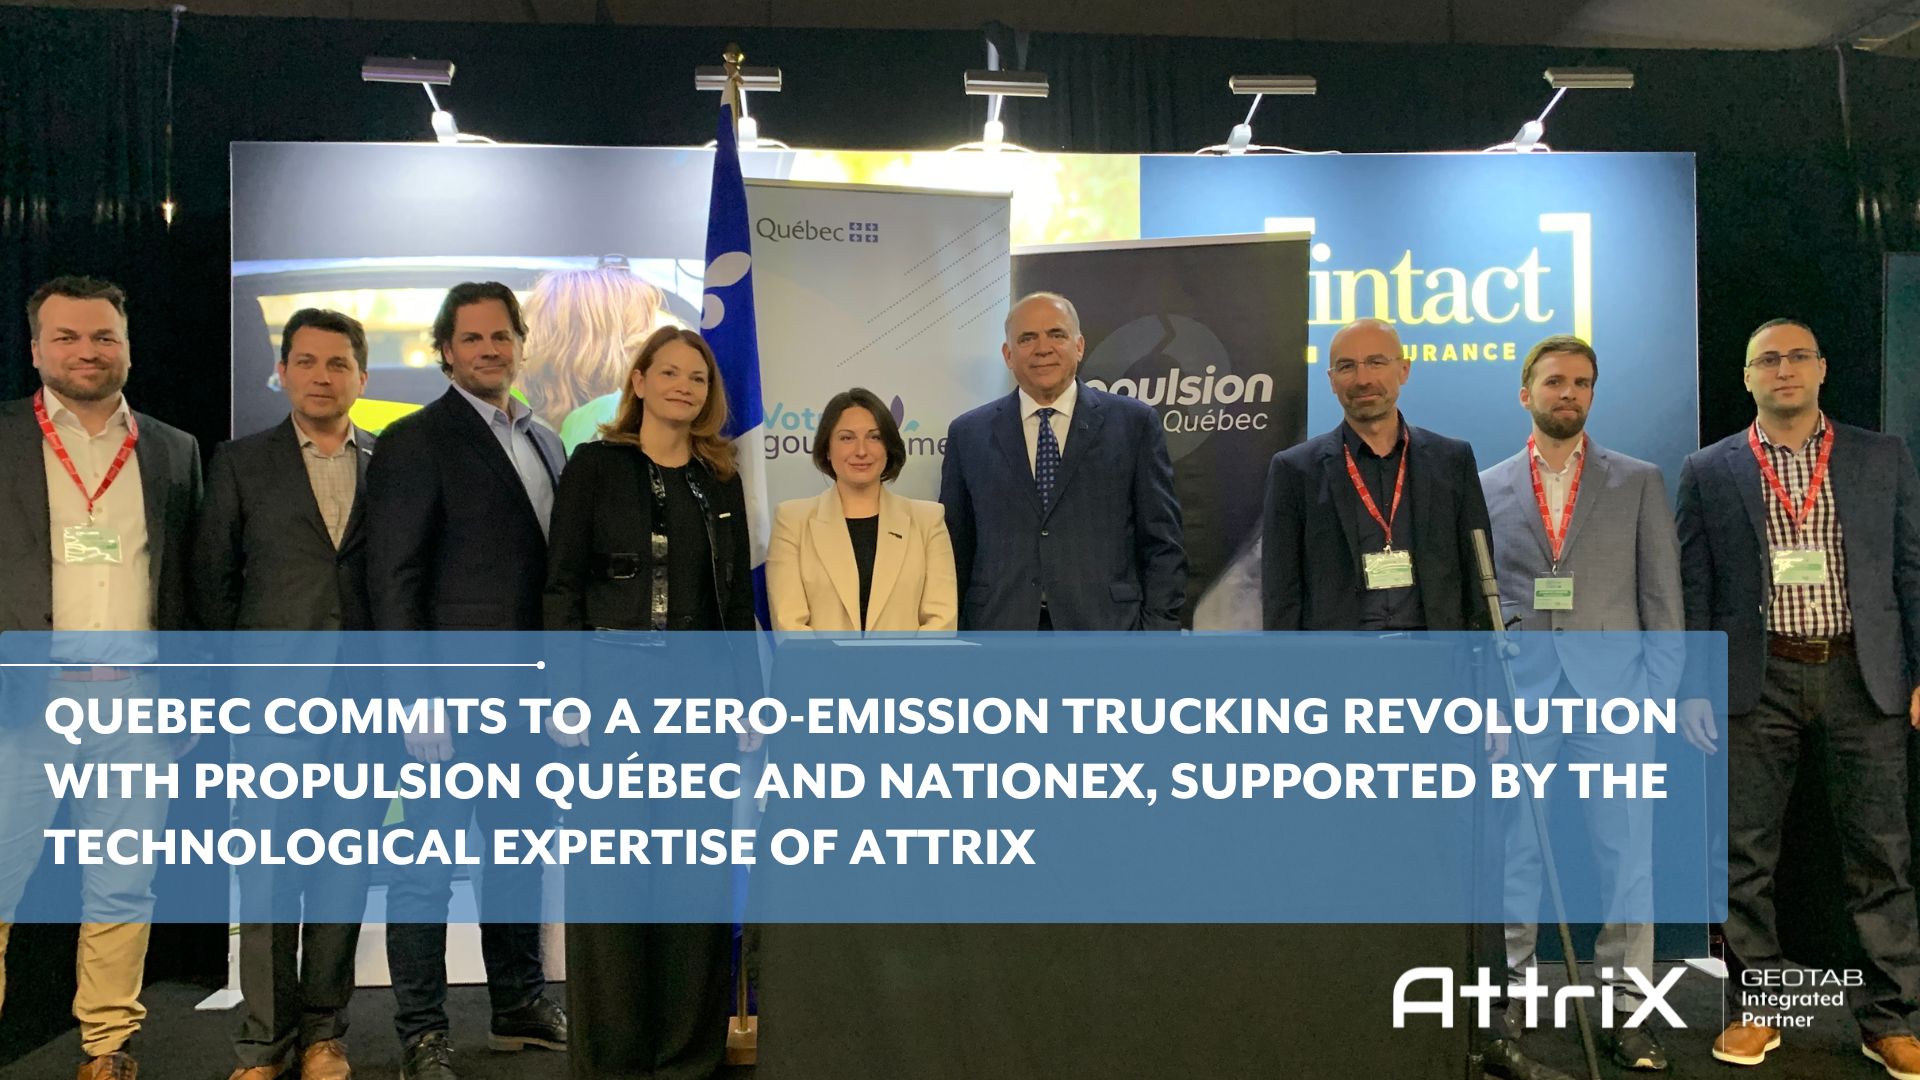 QUEBEC COMMITS TO A ZERO-EMISSION TRUCKING REVOLUTION WITH PROPULSION QUEBEC AND NATIONEX, SUPPORTED BY THE TECHNOLOGICAL EXPERTISE OF ATTRIX